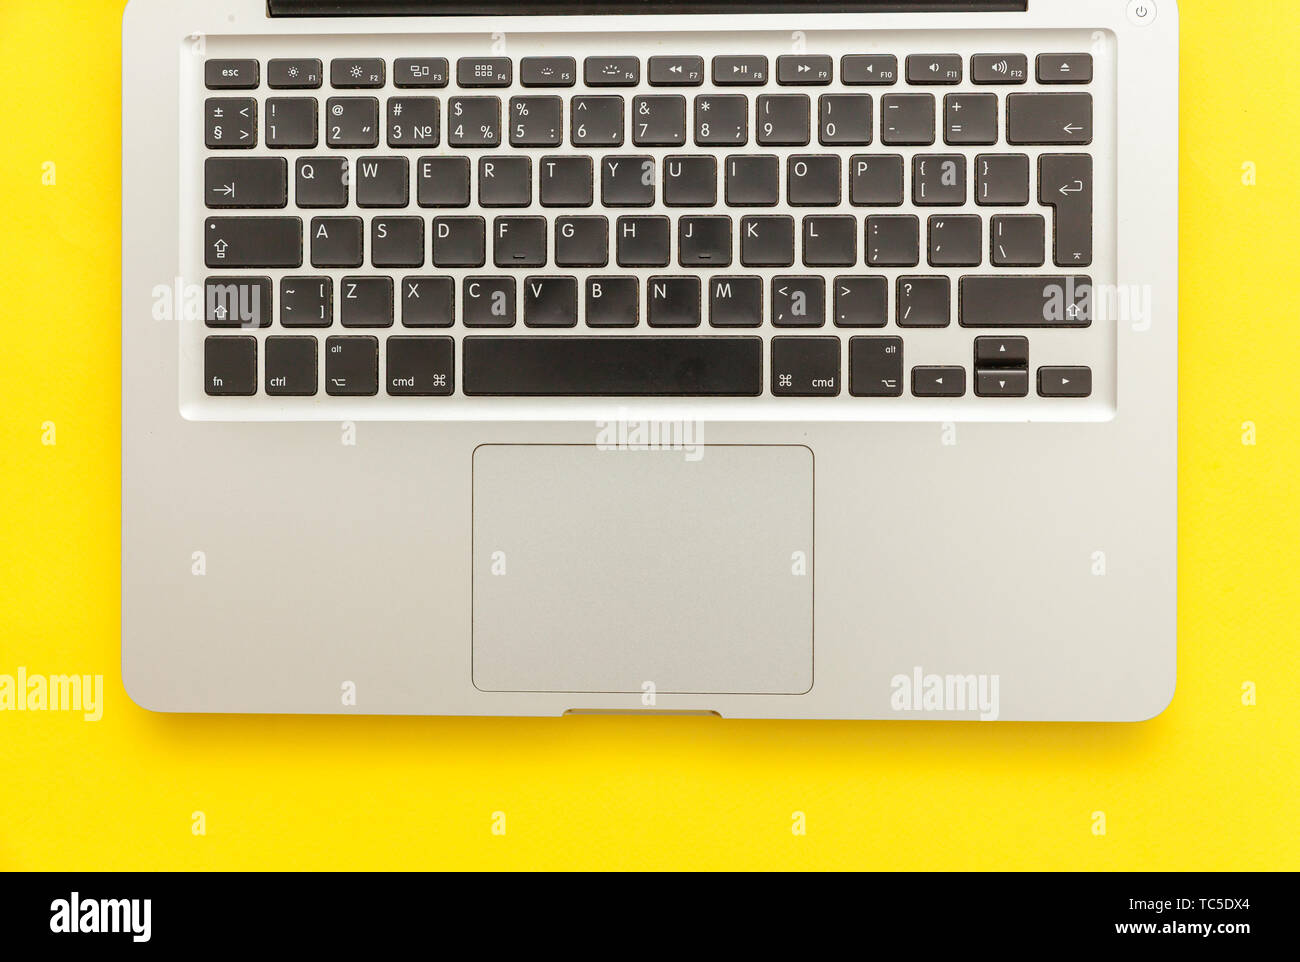 Keyboard Laptop Computer Isolated On Yellow Desk Background Modern Information Technology And Sofware Advances Freelance Home Office Programmer Or D Stock Photo Alamy